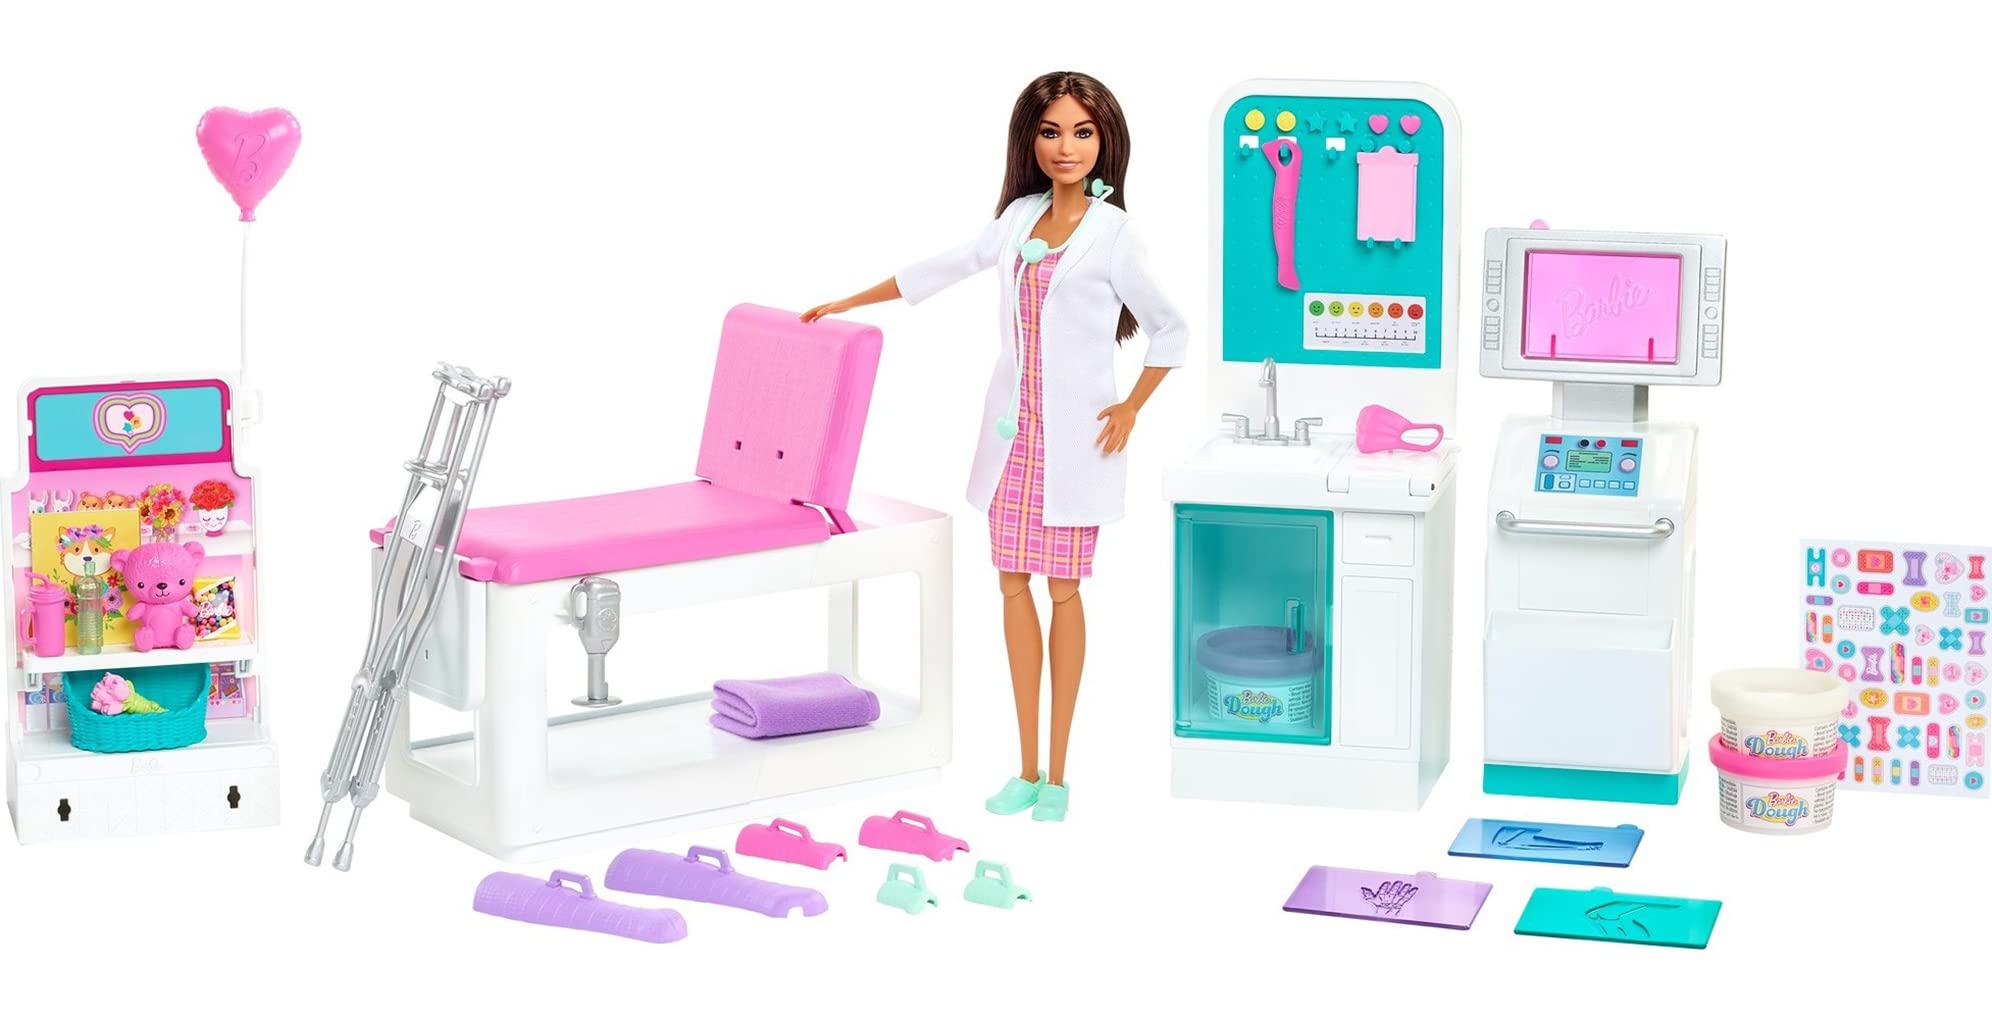 Promotions Barbie Doctor Doll (12-in/30.40-cm), Brunette Hair, Curvy Shape, Doctor Coat, Print Dress, Stethoscope Accessory, Great Toy Gift for Ages 3 Years Old & Up XADWR2gOY en France Online